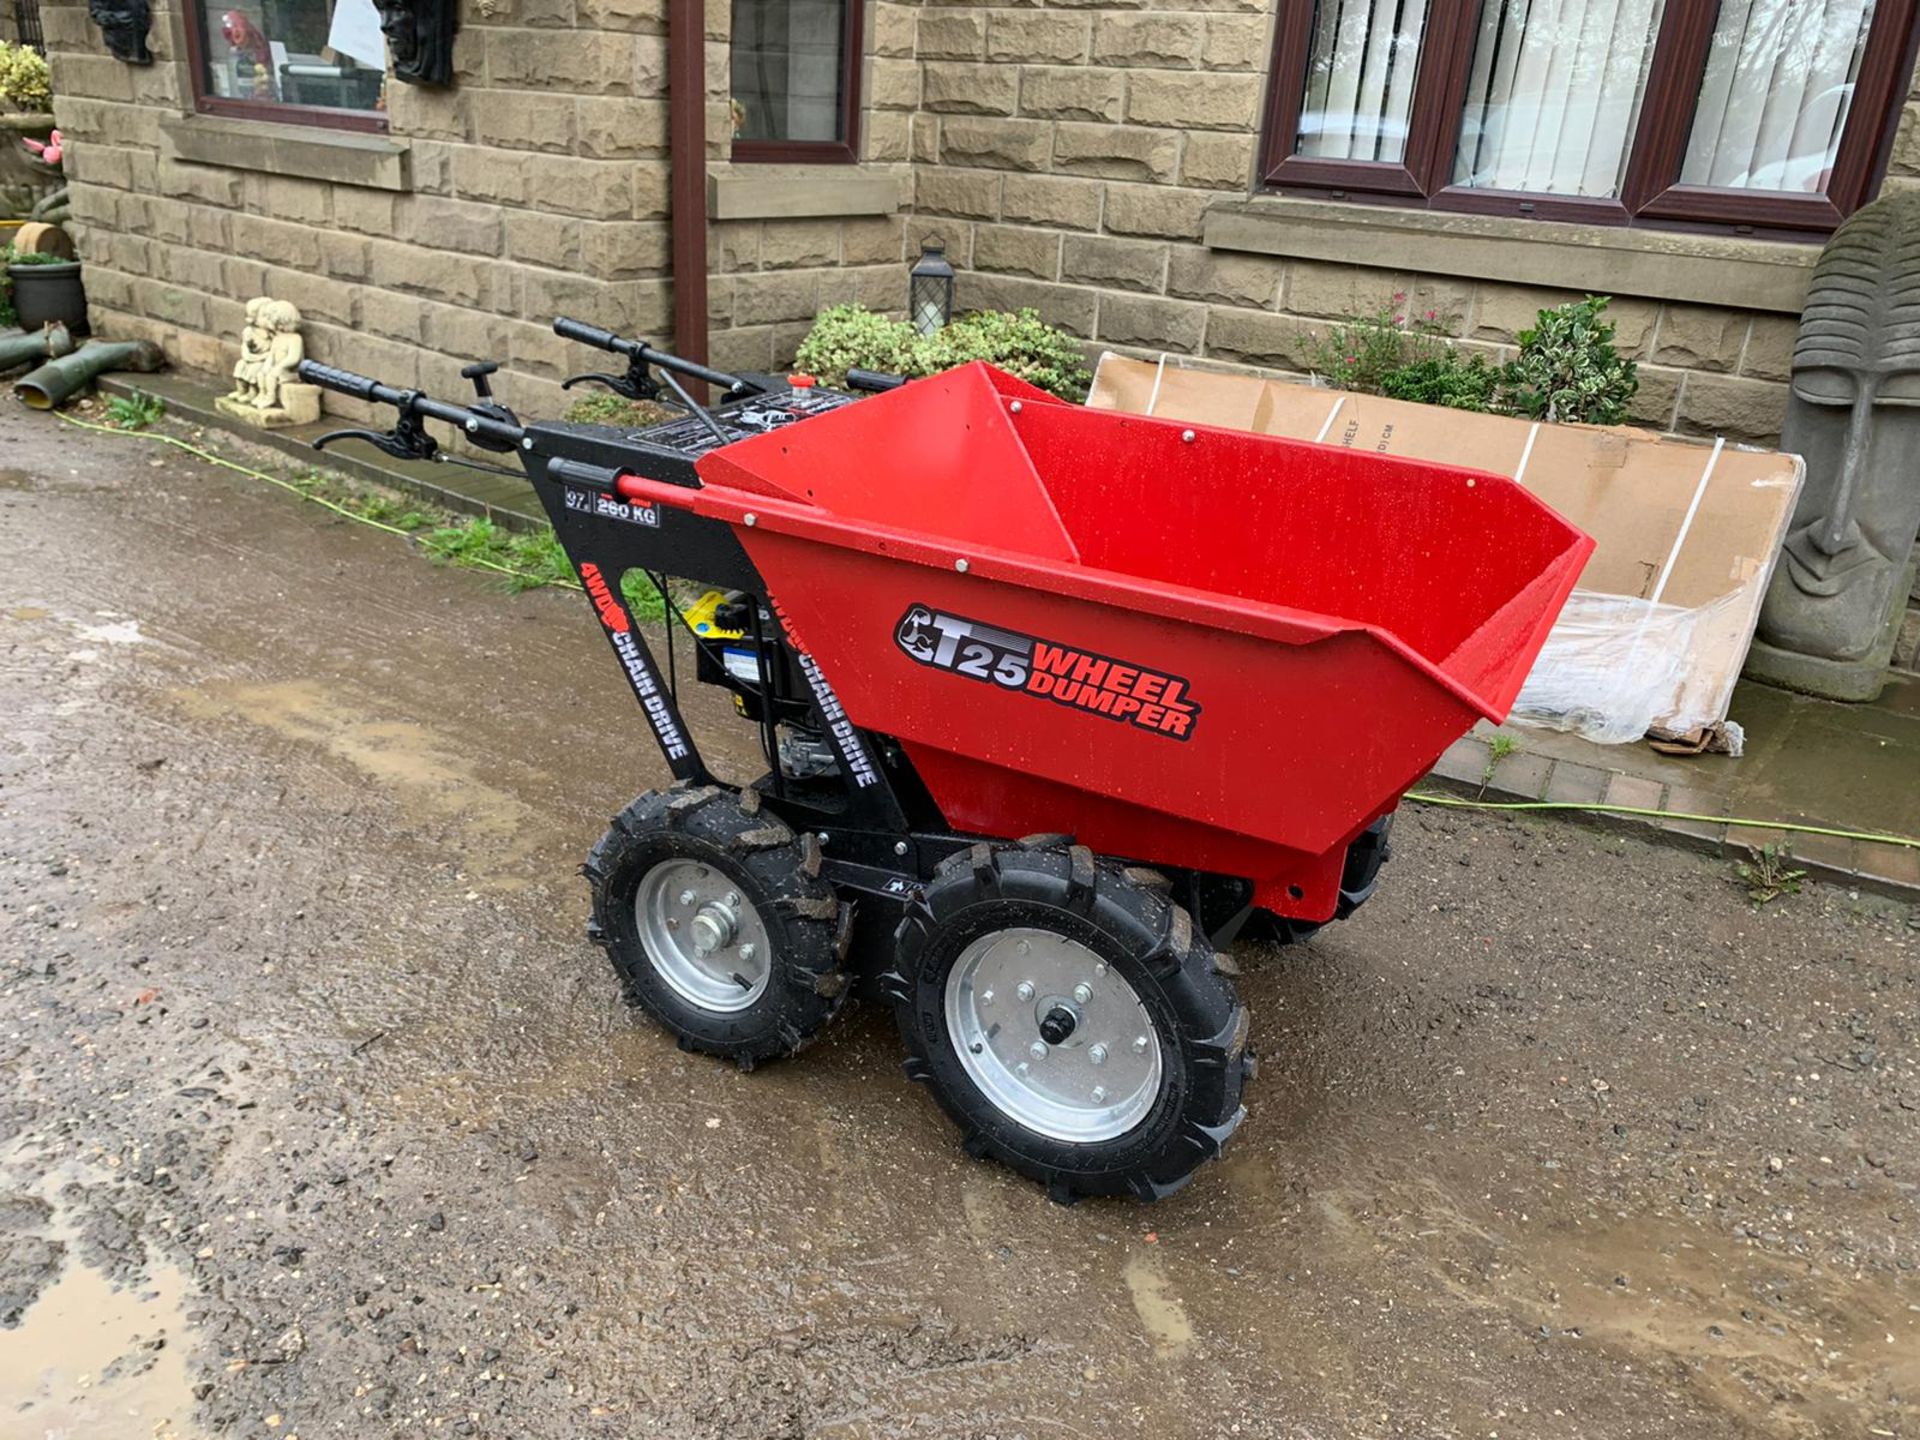 NEW AND UNUSED 260kg 4WD WALK BEHIND DUMPER, BRIGGS AND STRATTON ENGINE *NO VAT* - Image 2 of 10